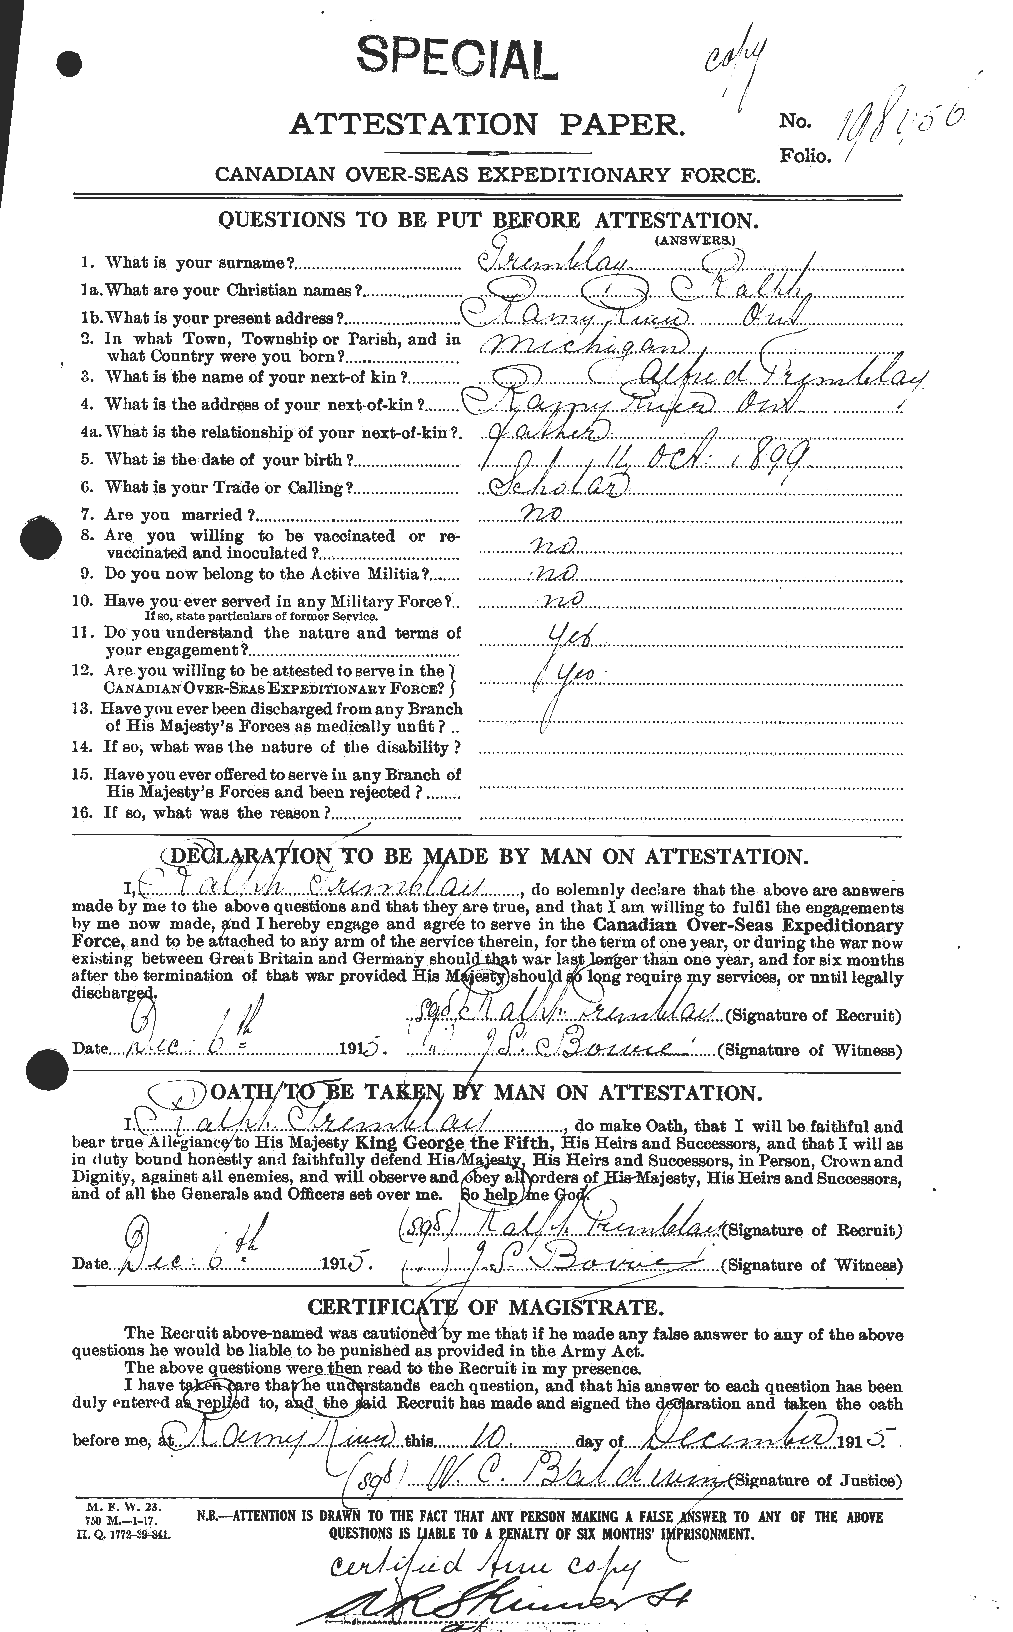 Personnel Records of the First World War - CEF 639246a